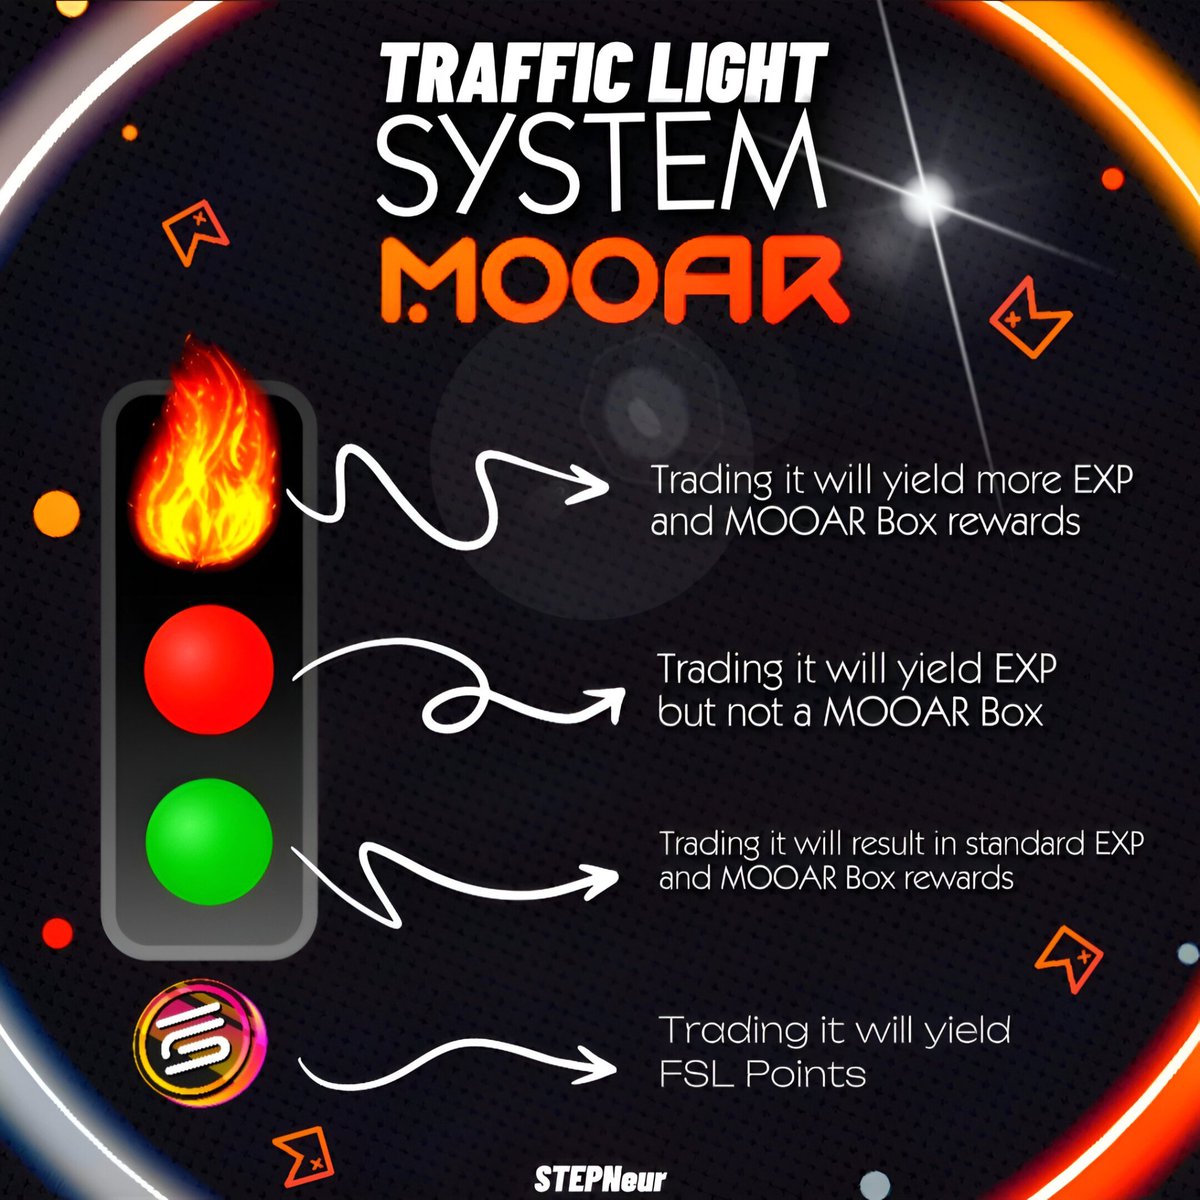 𝙏𝙍𝘼𝙁𝙁𝙄𝘾 𝙇𝙄𝙂𝙃𝙏 𝙎𝙔𝙎𝙏𝙀𝙈 𝙊𝙉 @mooarofficial🚦 The season 2 of #MOOARBox has started and here's how to make the most of this period 🔥 During your purchase on mooar.com, some tags are indicated on the NFTs. Here are their meanings 👇